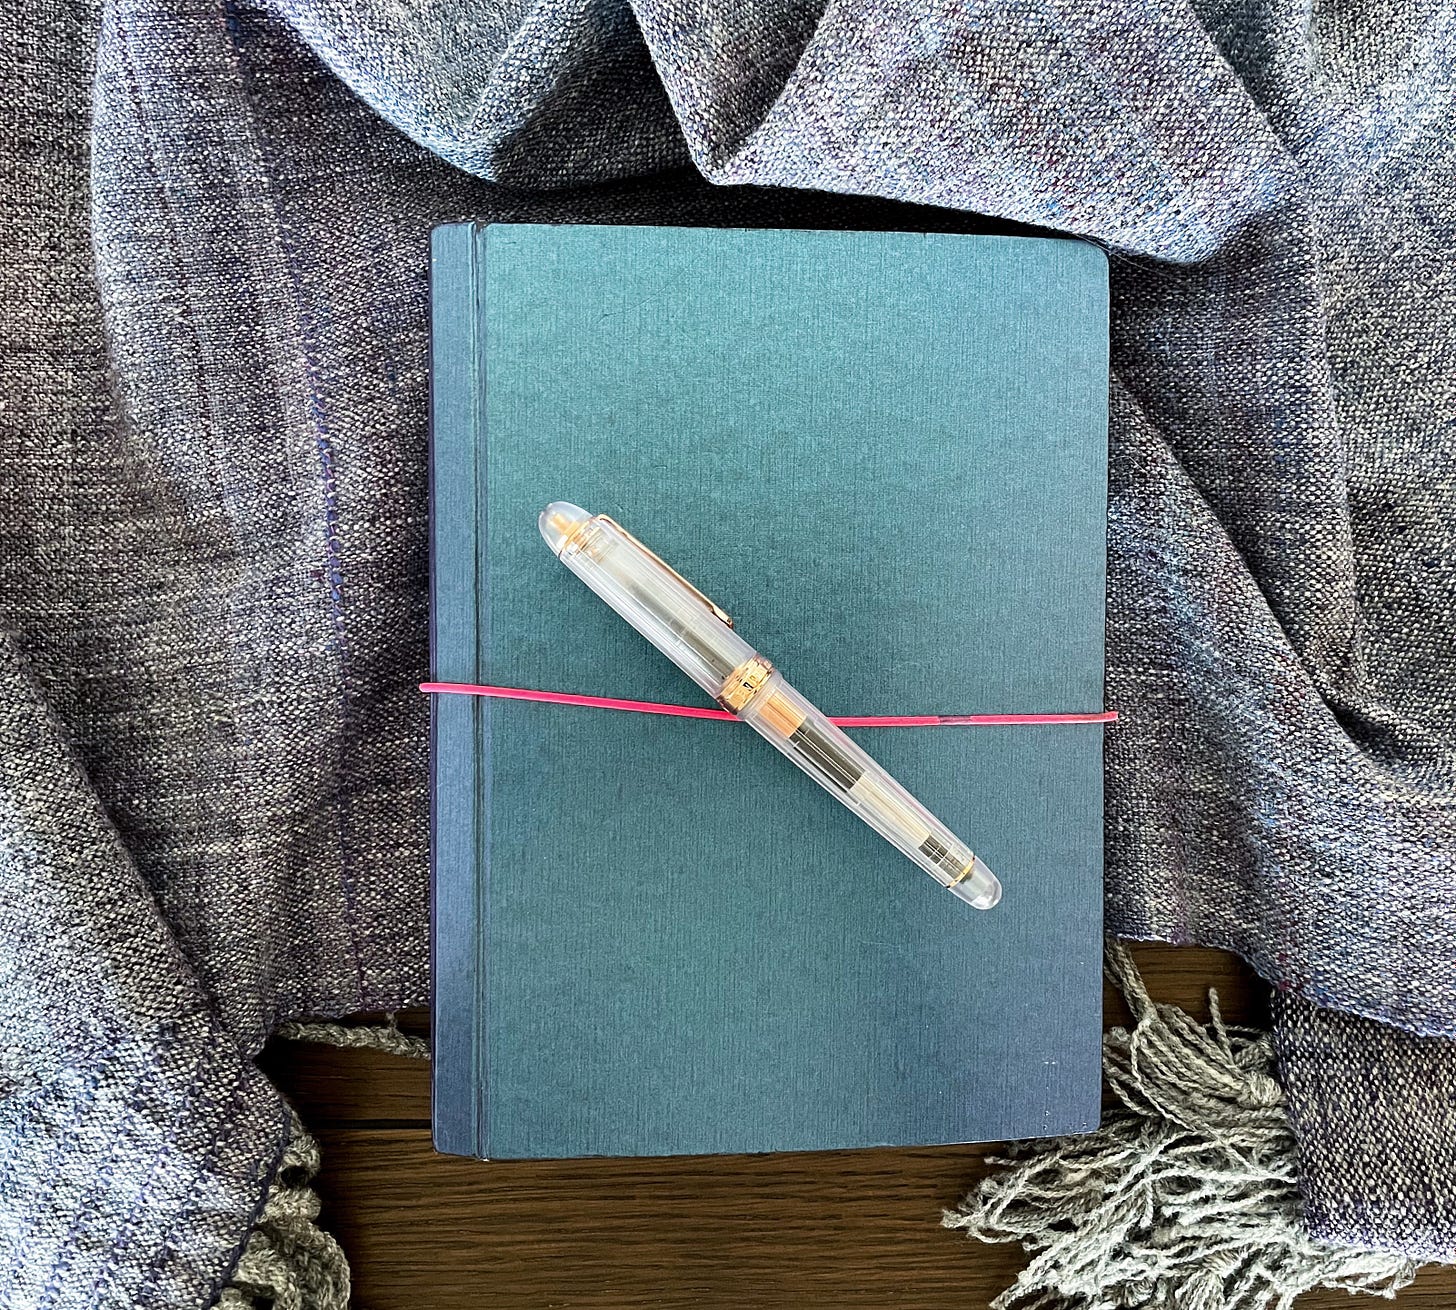 A blue notebook on a woven shawl